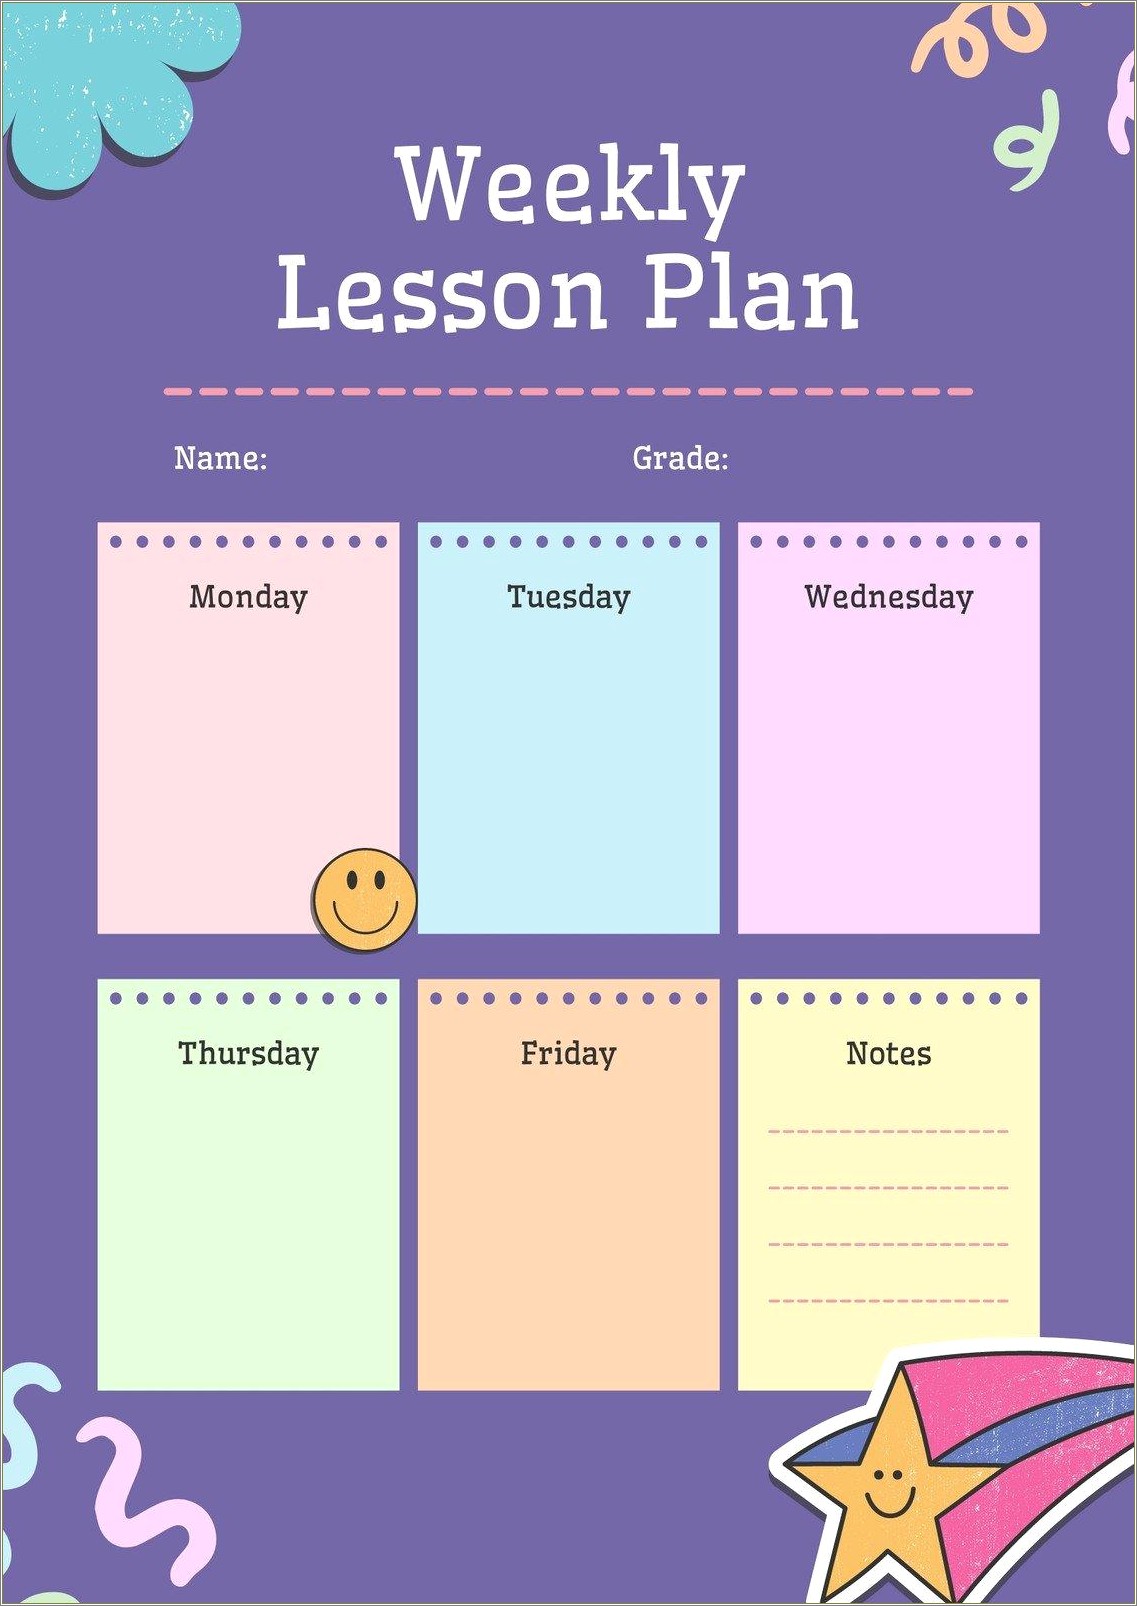 Free Weekly Lesson Plan Templates For Elementary Teachers